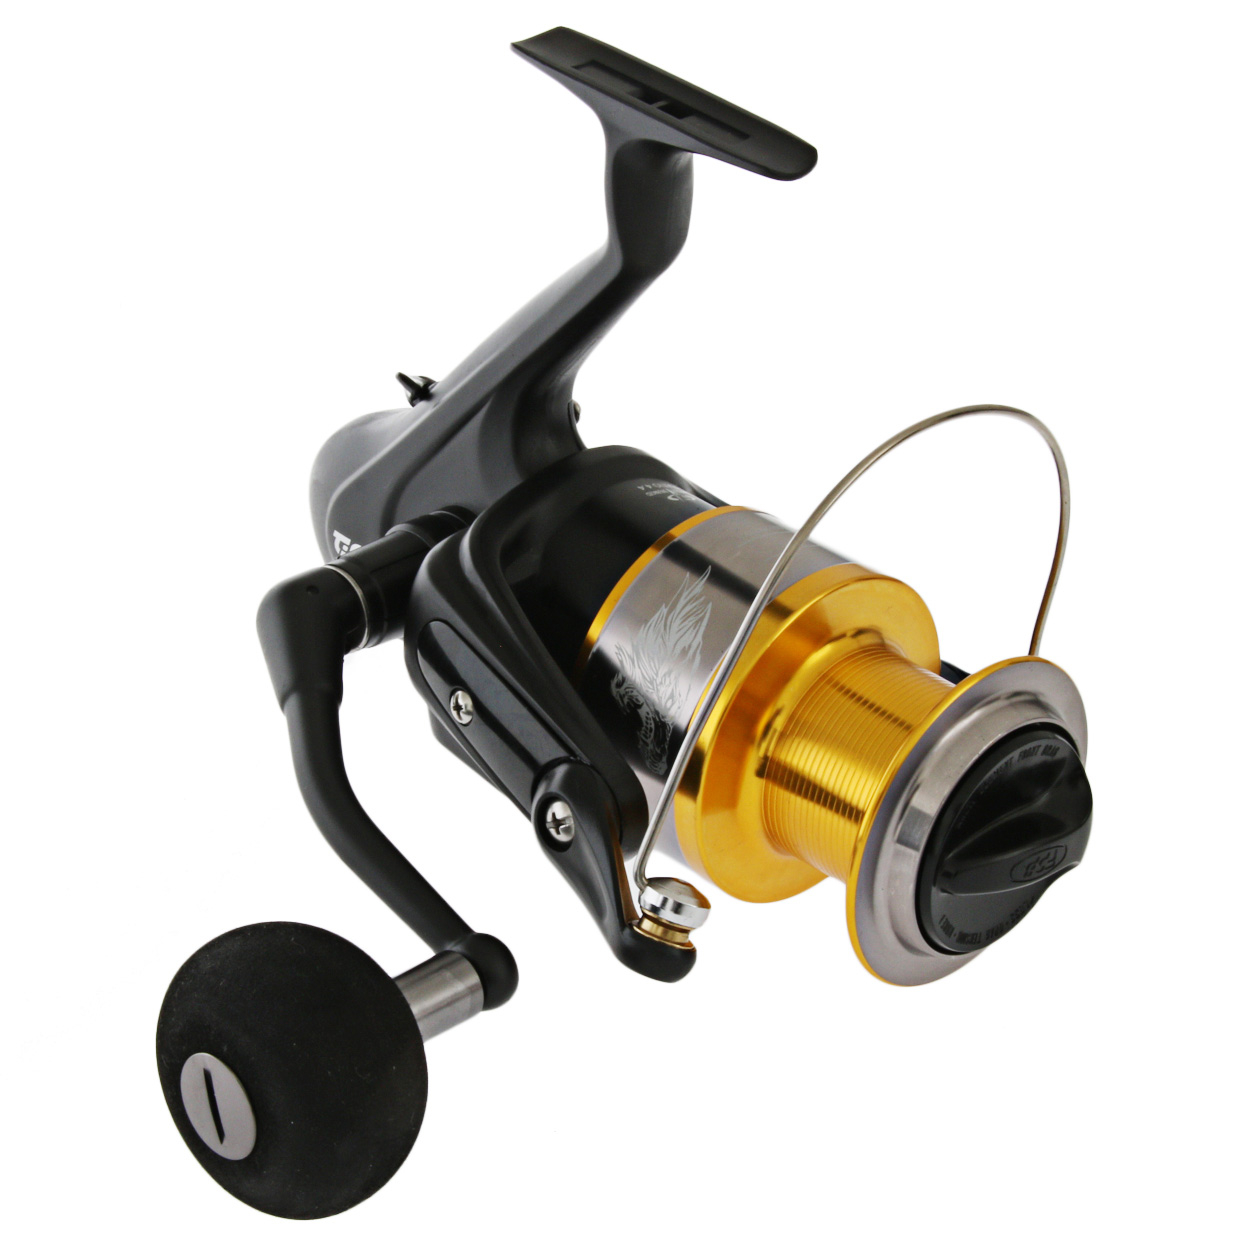 Buy TiCA Brute Wolf BW8000 Surfcasting Reel online at Marine-Deals